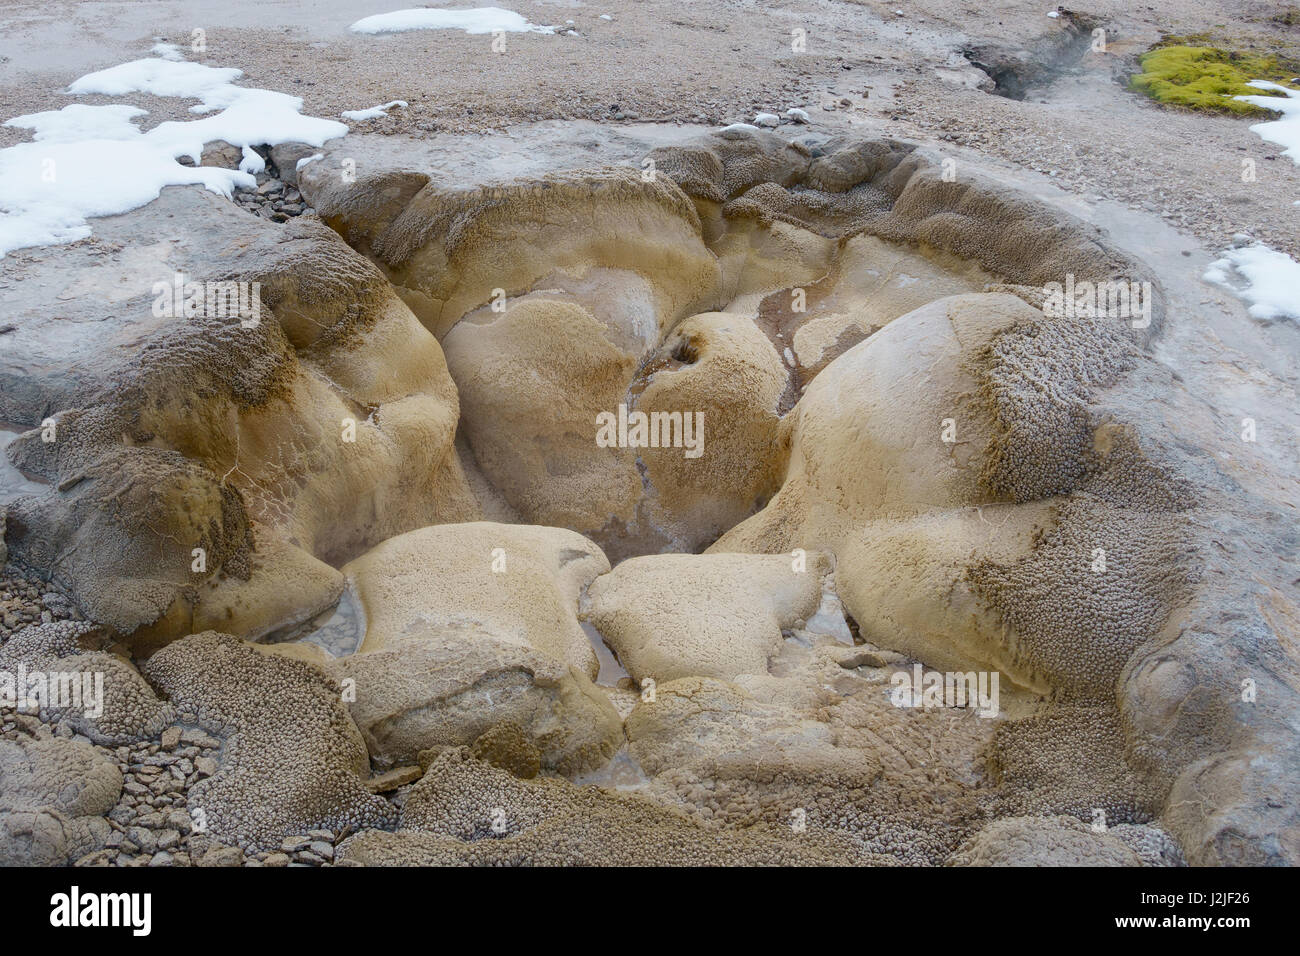 Shell Spring, Biscuit geyser basin, Upper Geysir Basin, fumarole, geothermal activity, volcanic feature, hot spring, Yellowstone National Park, Wyomin Stock Photo